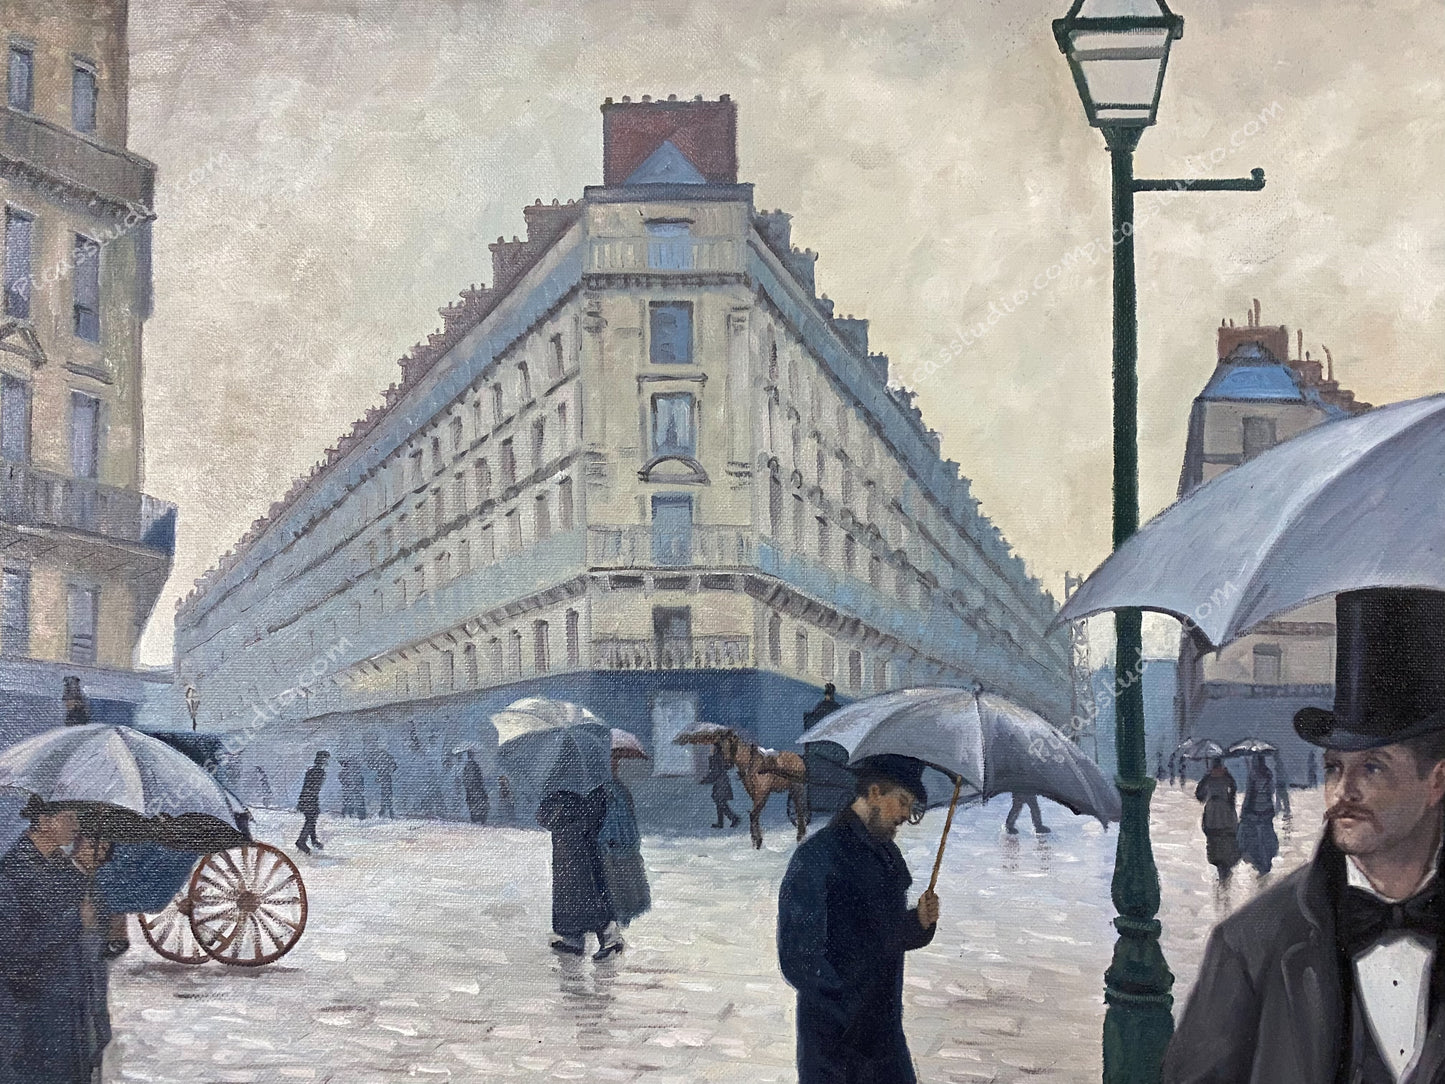 Paris Street, Rainy Day Gustave Caillebotte Oil Painting Hand Painted on Canvas Vintage Wall Art Decor Unframed